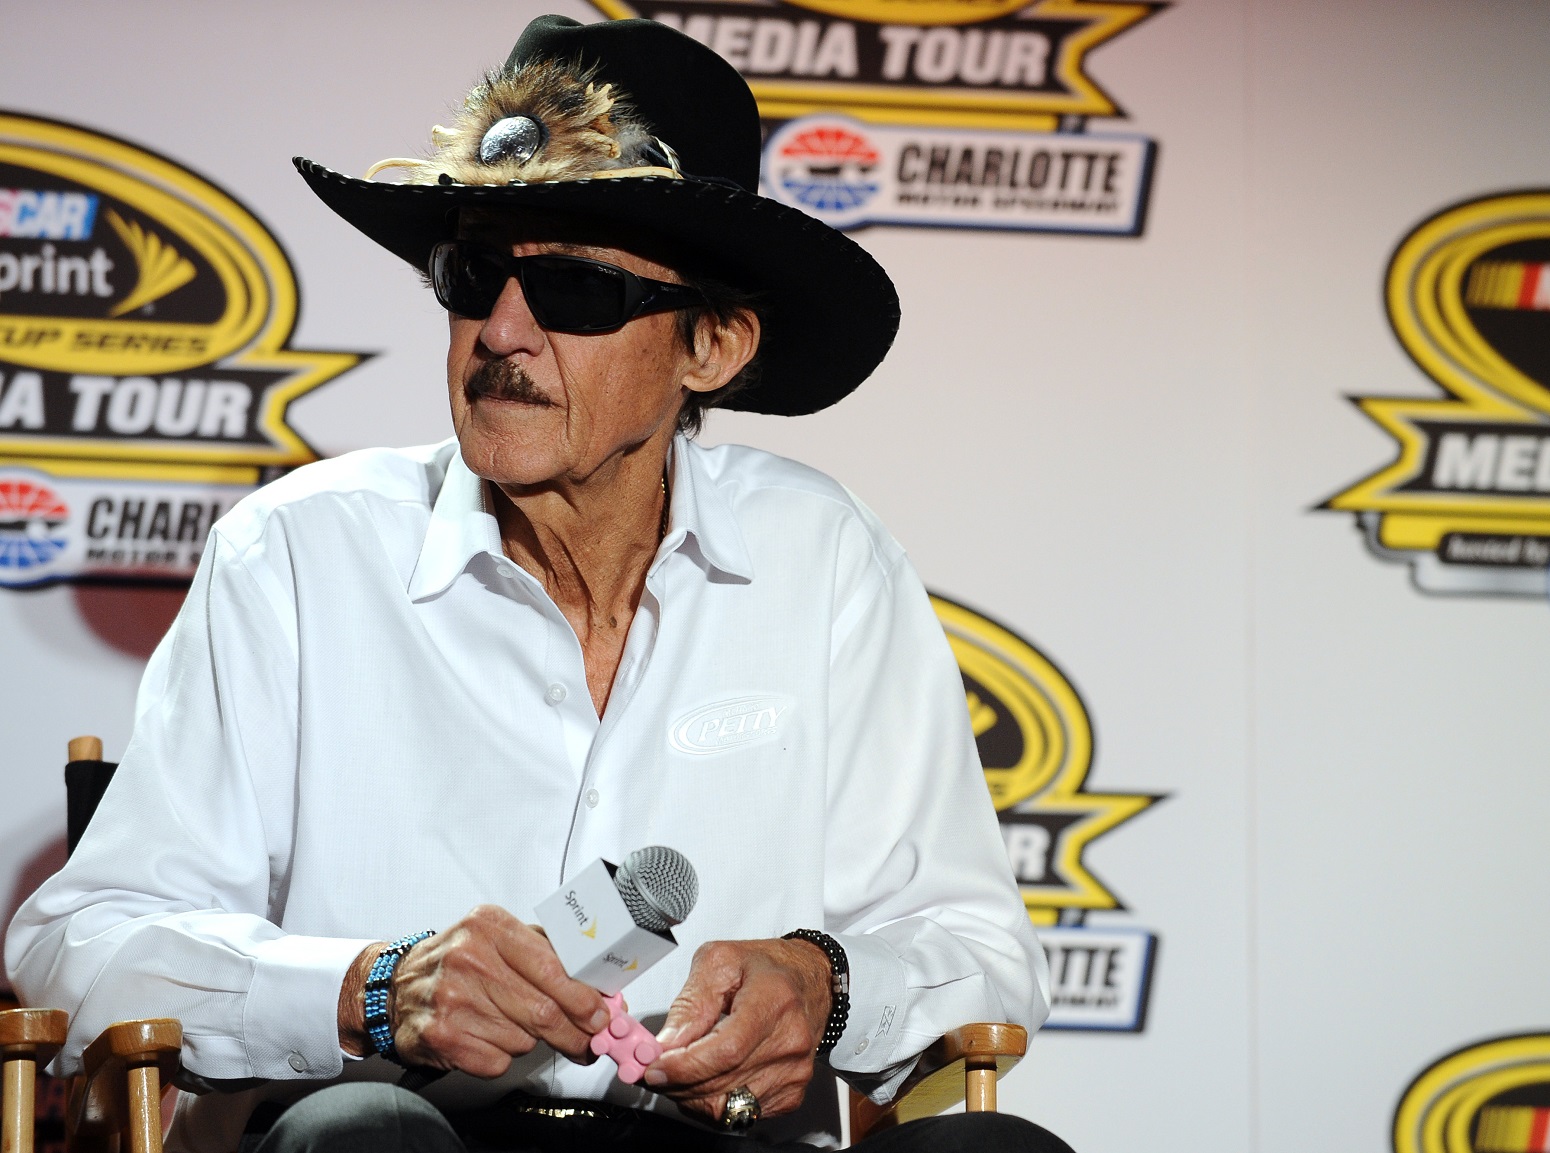 Richard Petty Miraculously Escaped Death in a Violent Crash Early in His NASCAR Career